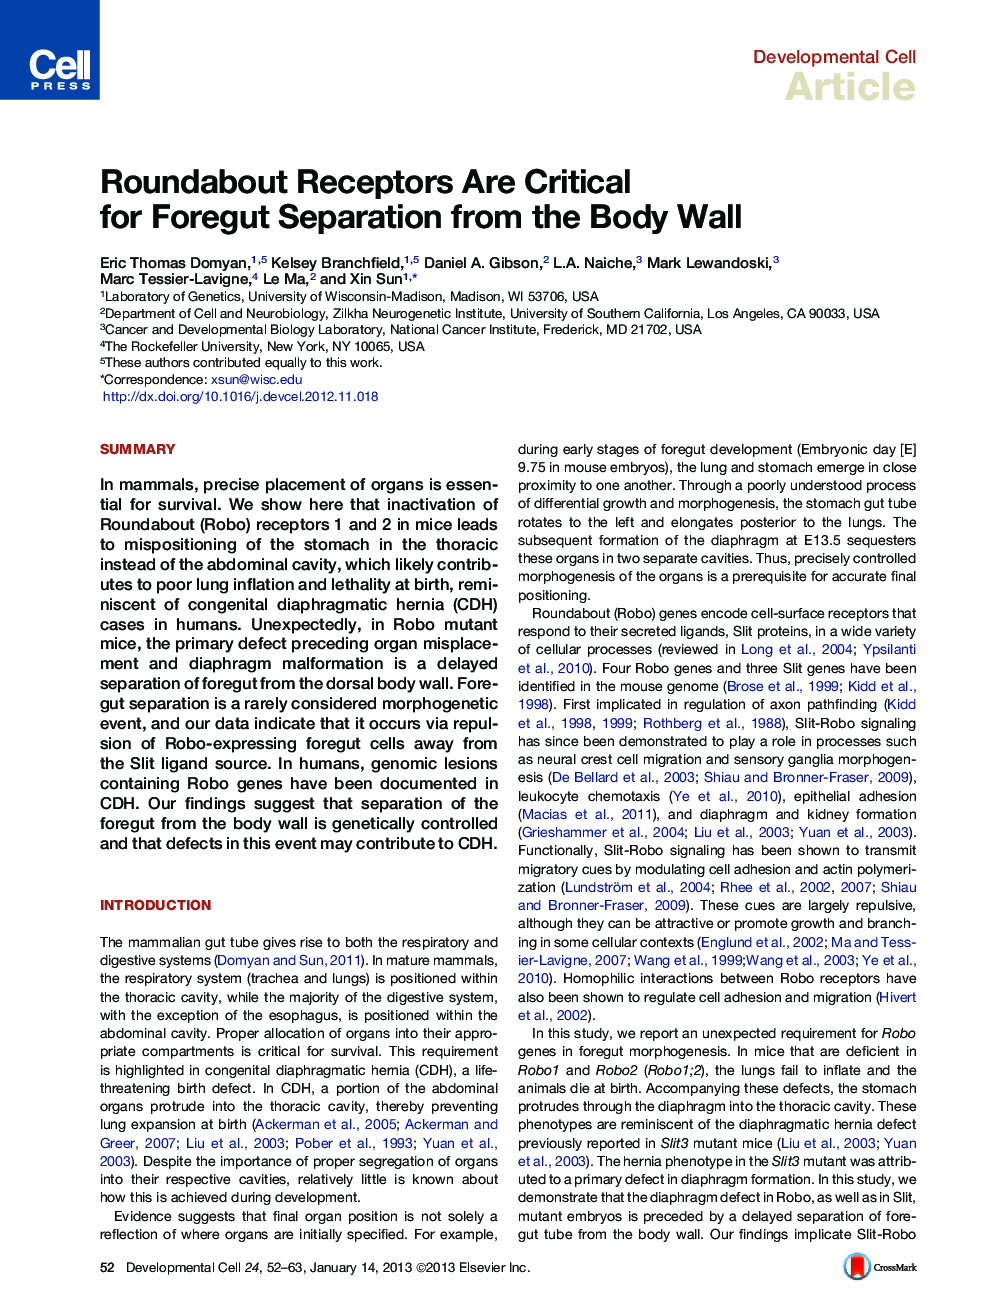 Roundabout Receptors Are Critical for Foregut Separation from the Body Wall